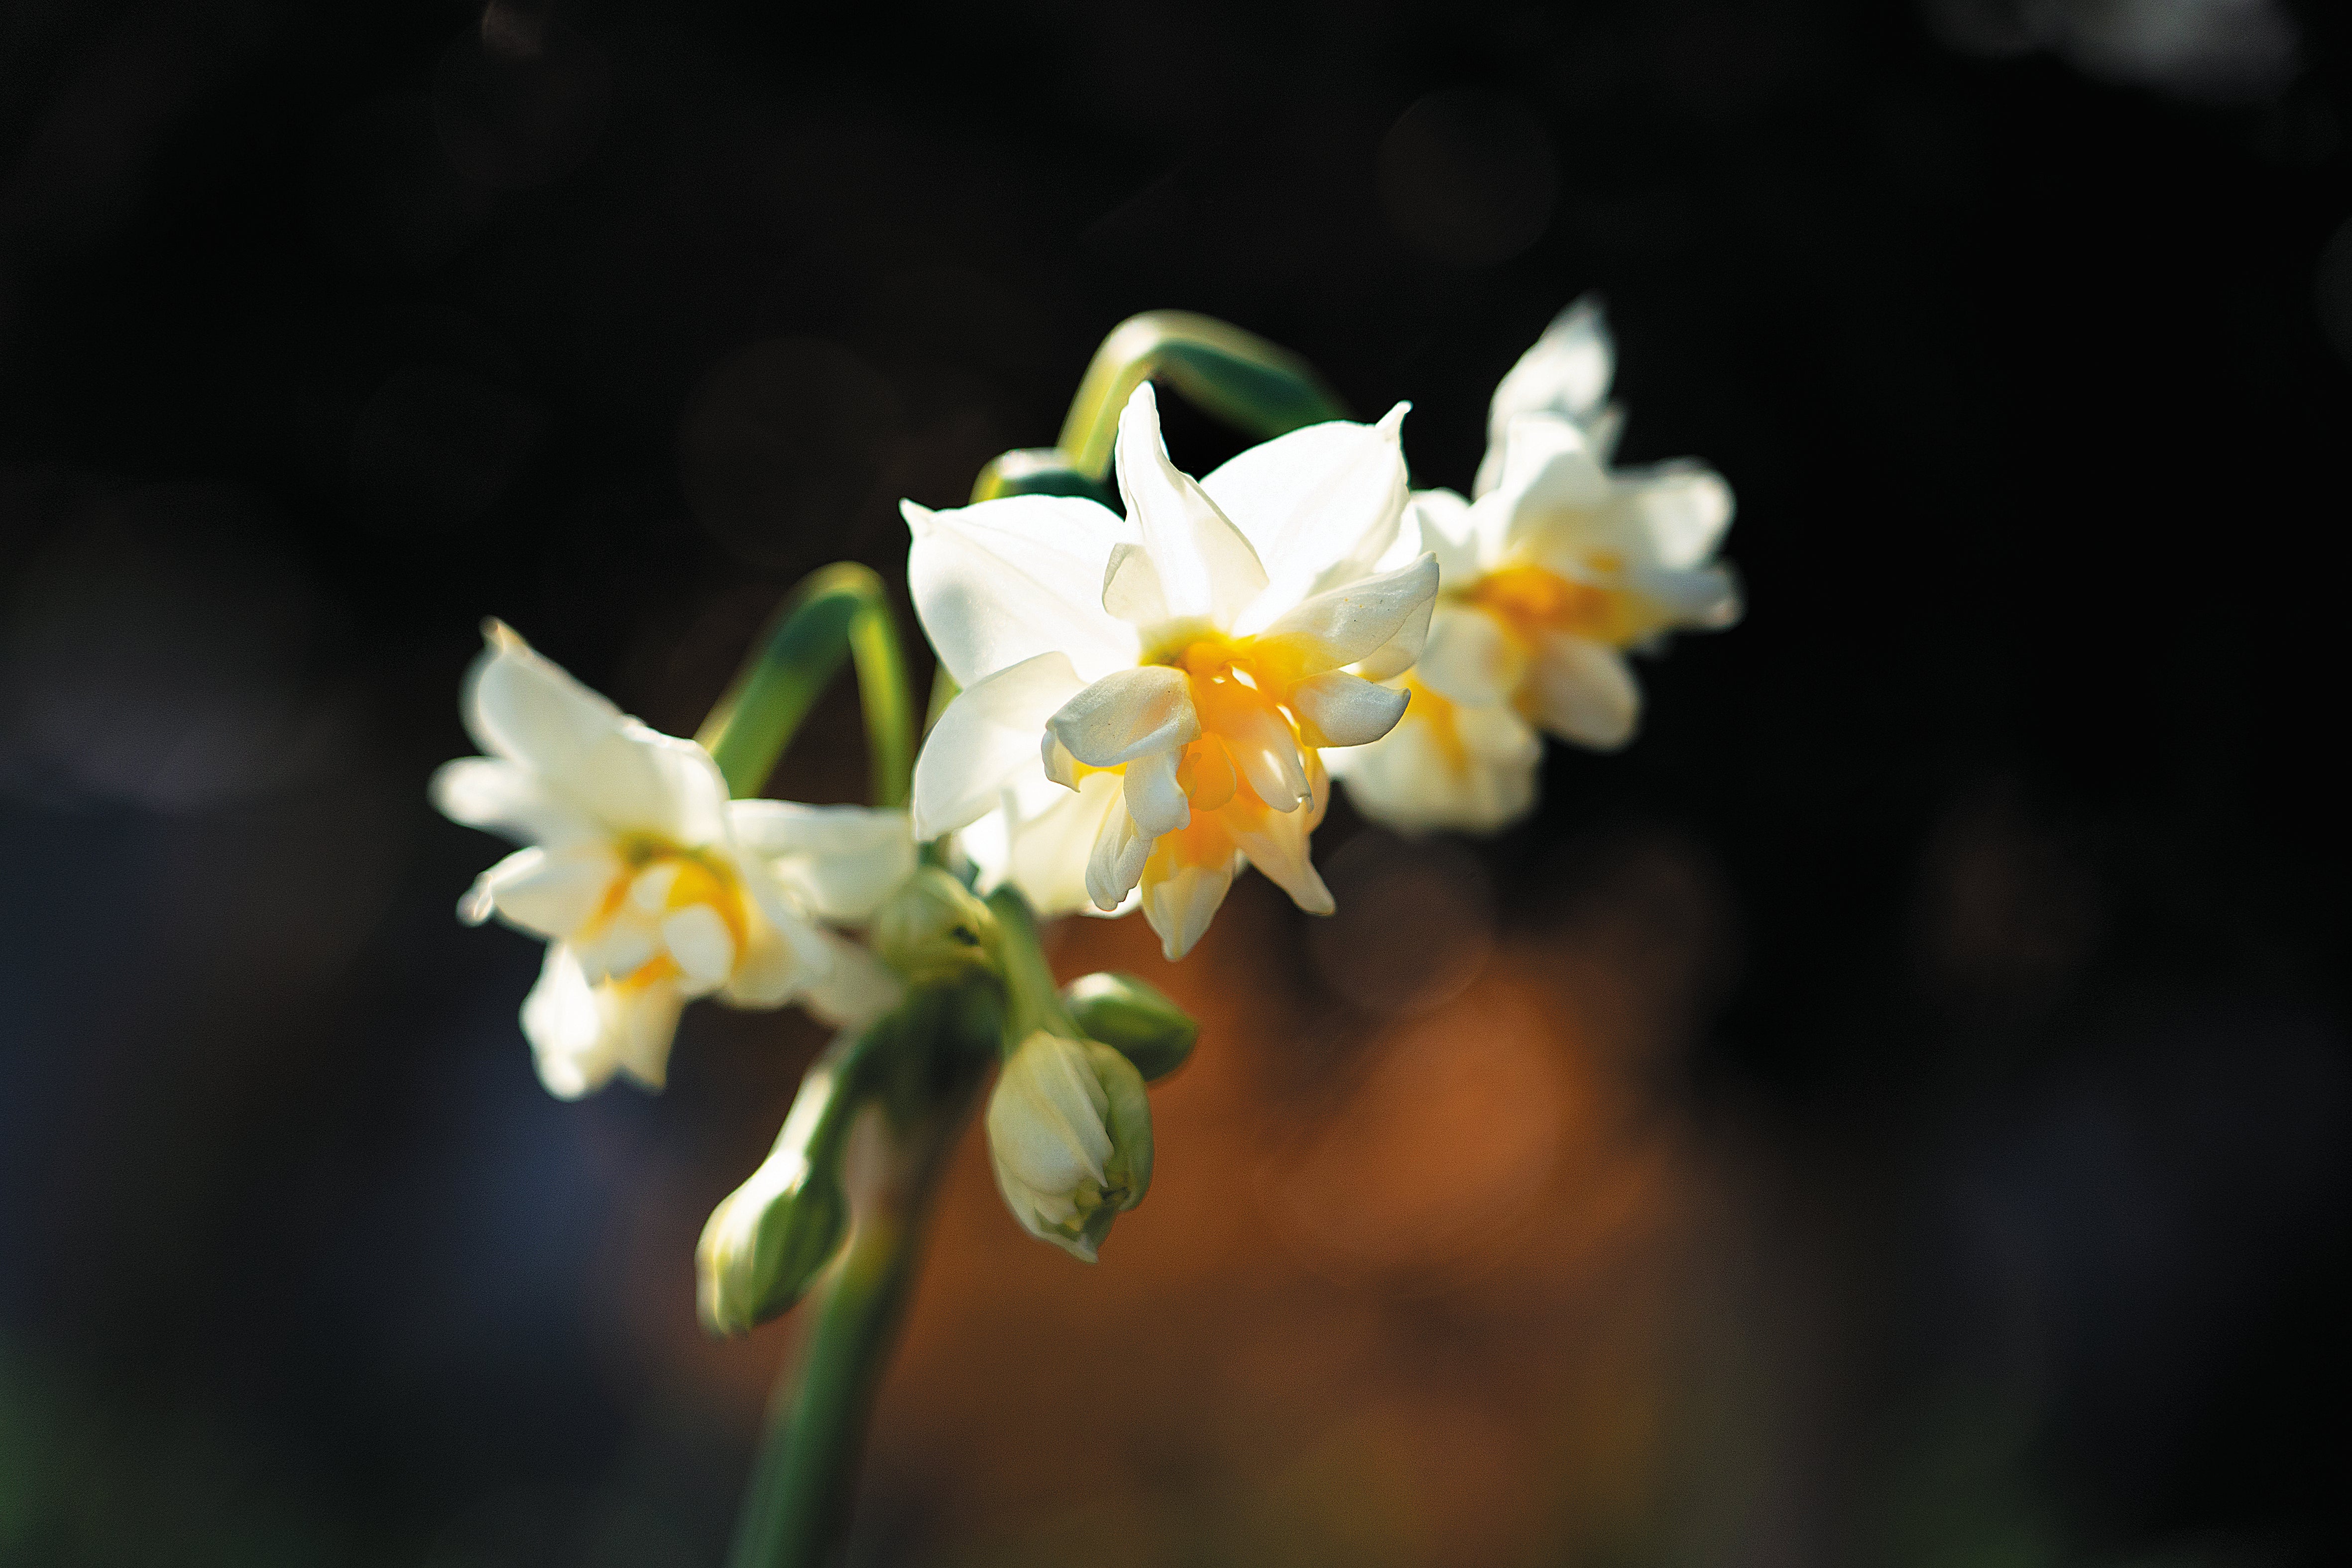 The Chongming daffodil usually has double-layered petals